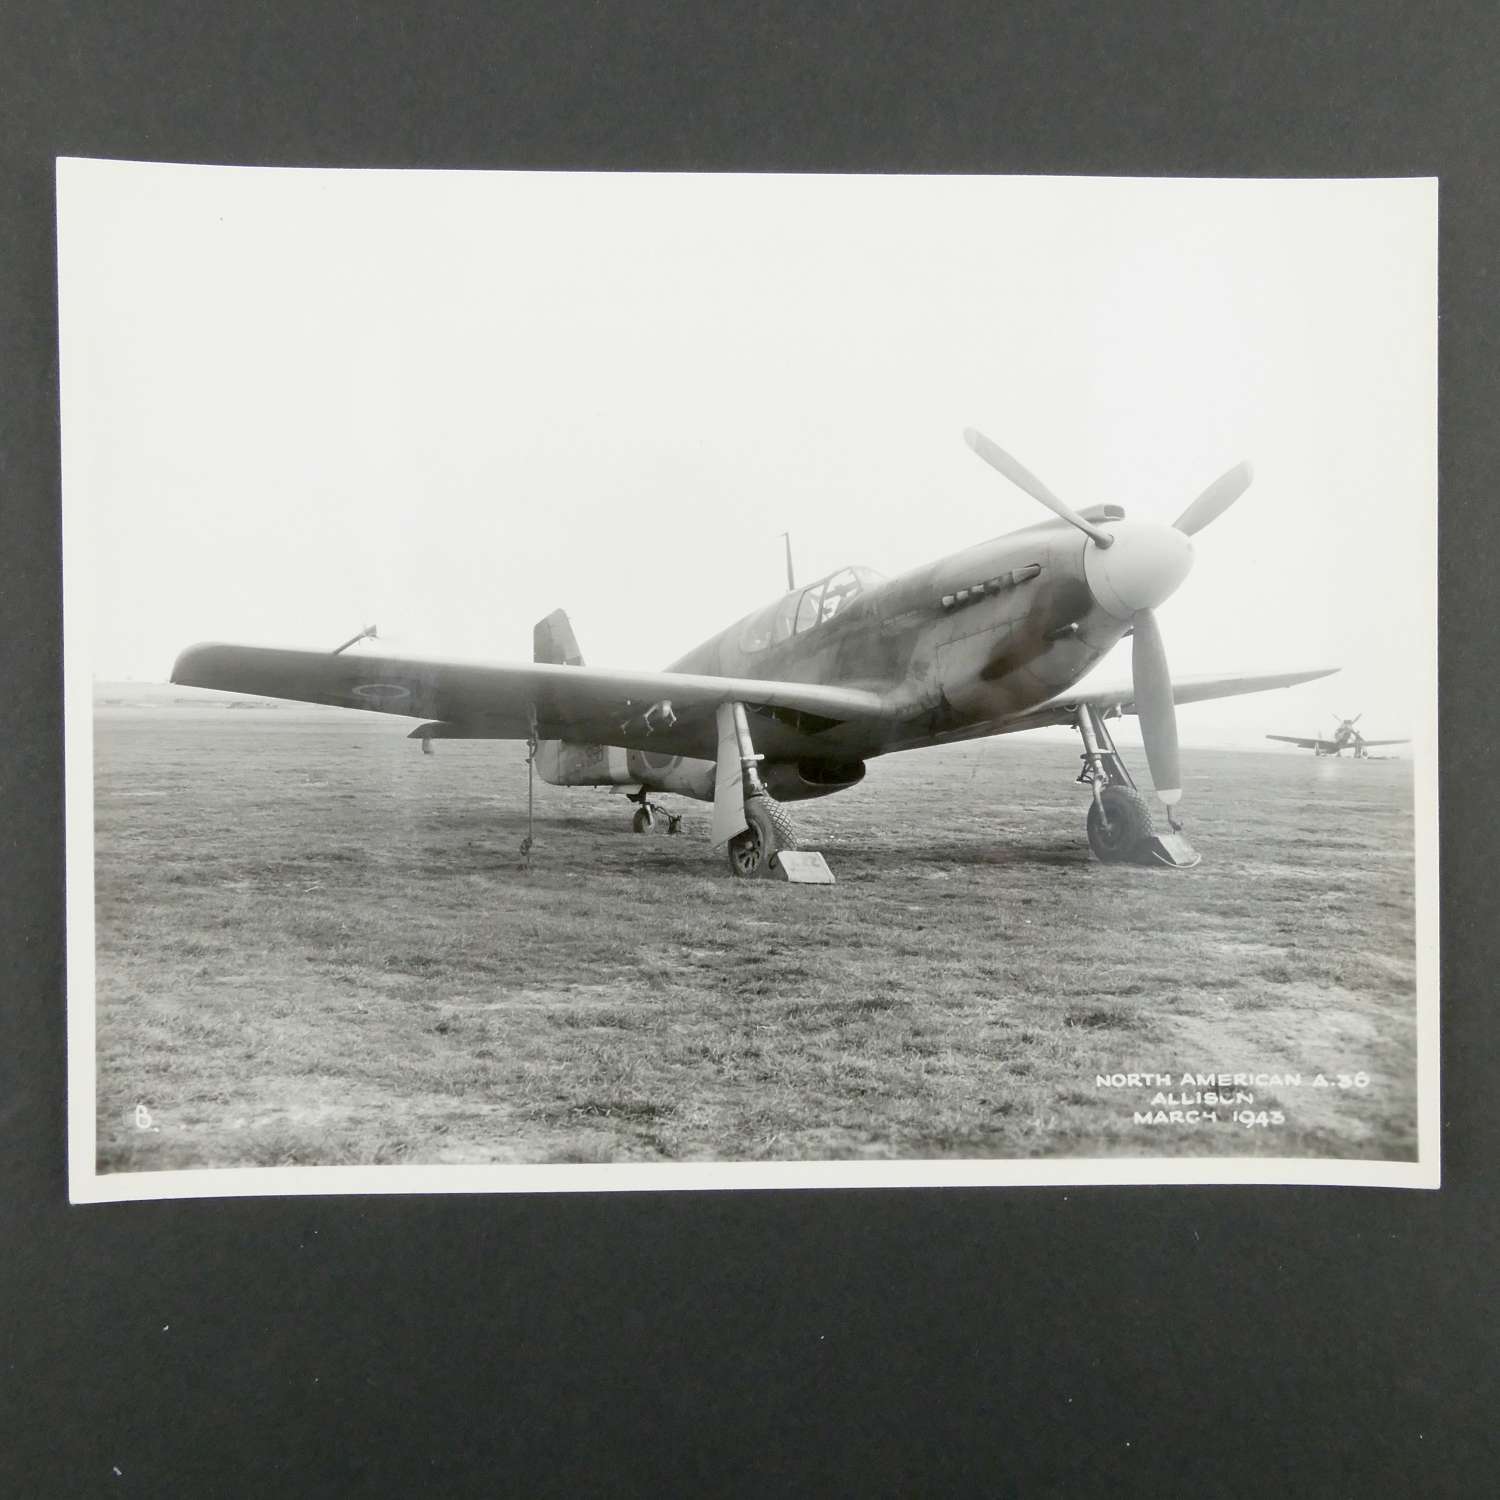 Official photograph - North American A-36, 1943